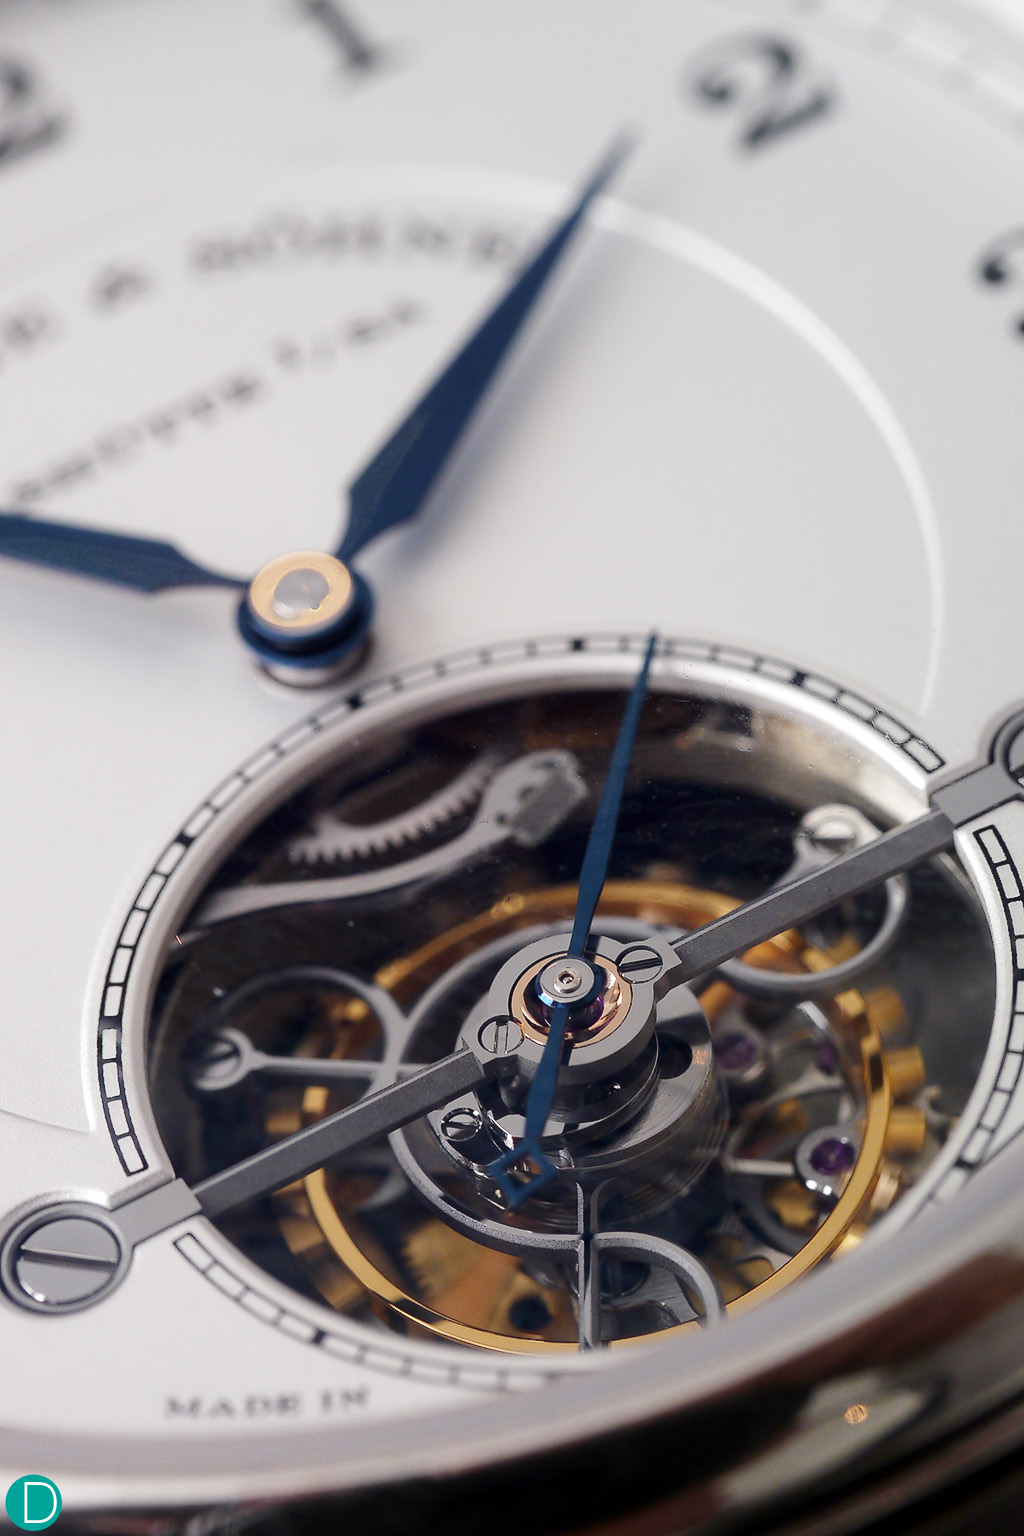 Lange 1815 Tourbillon showing detail of dial cutout which exposes the magnificent tourbillon and seconds hand.